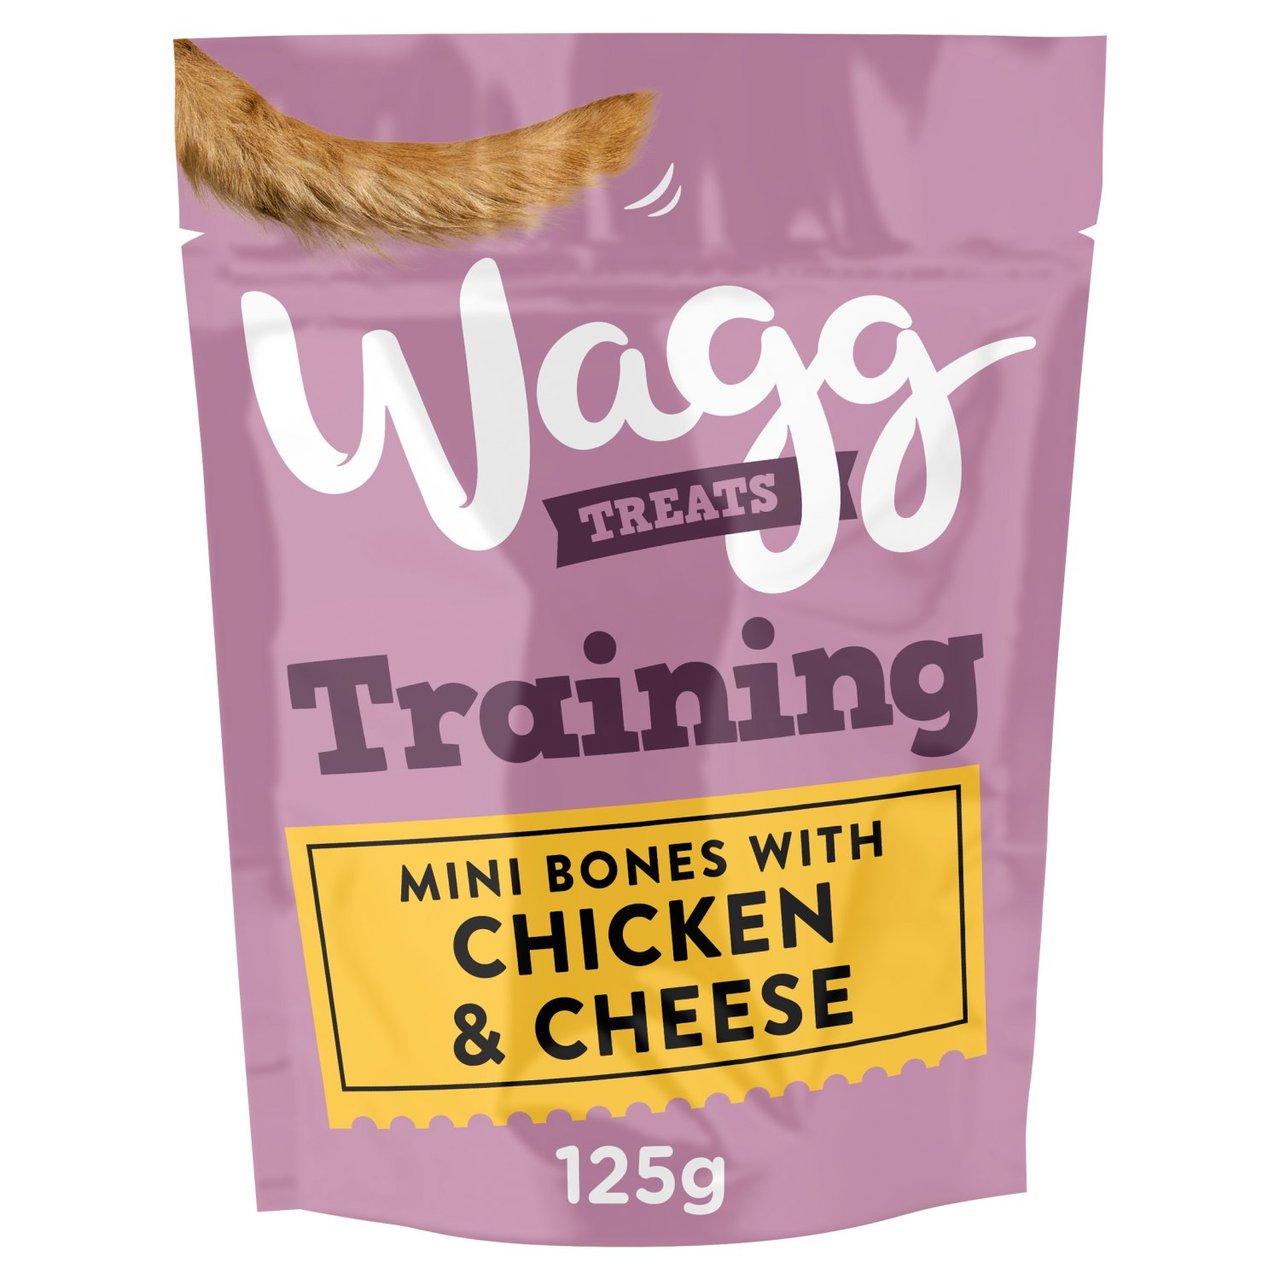 An image of Wagg Training Treats with Chicken & Cheese